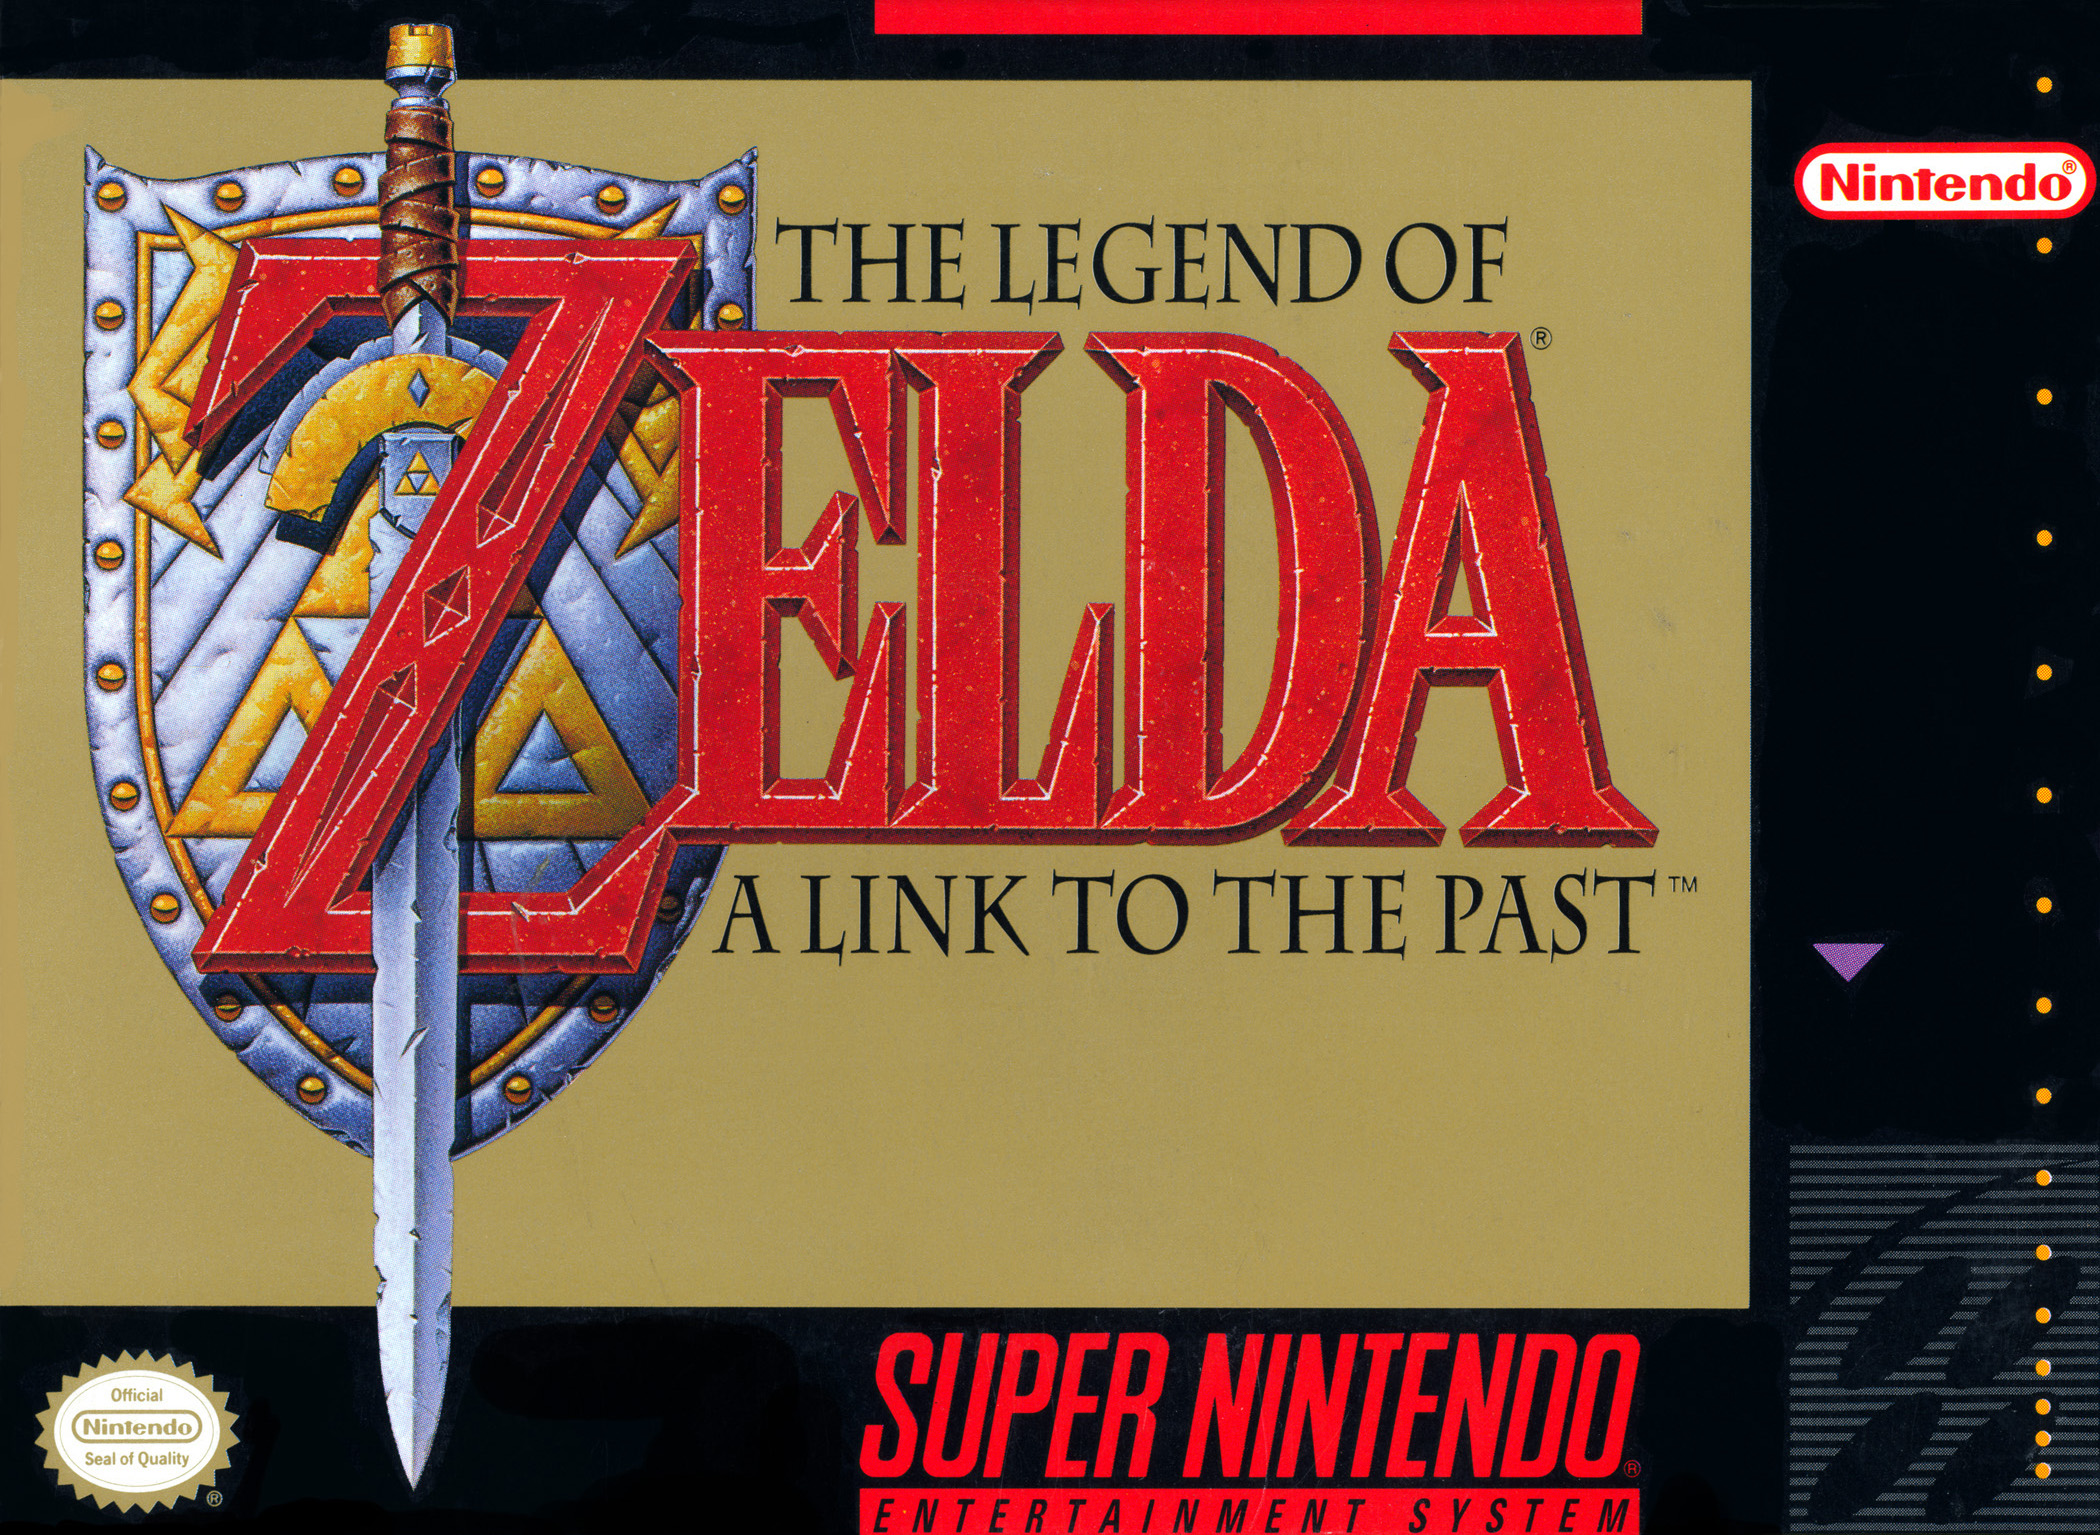 The Legend of Zelda: A Link to the Past switch box art